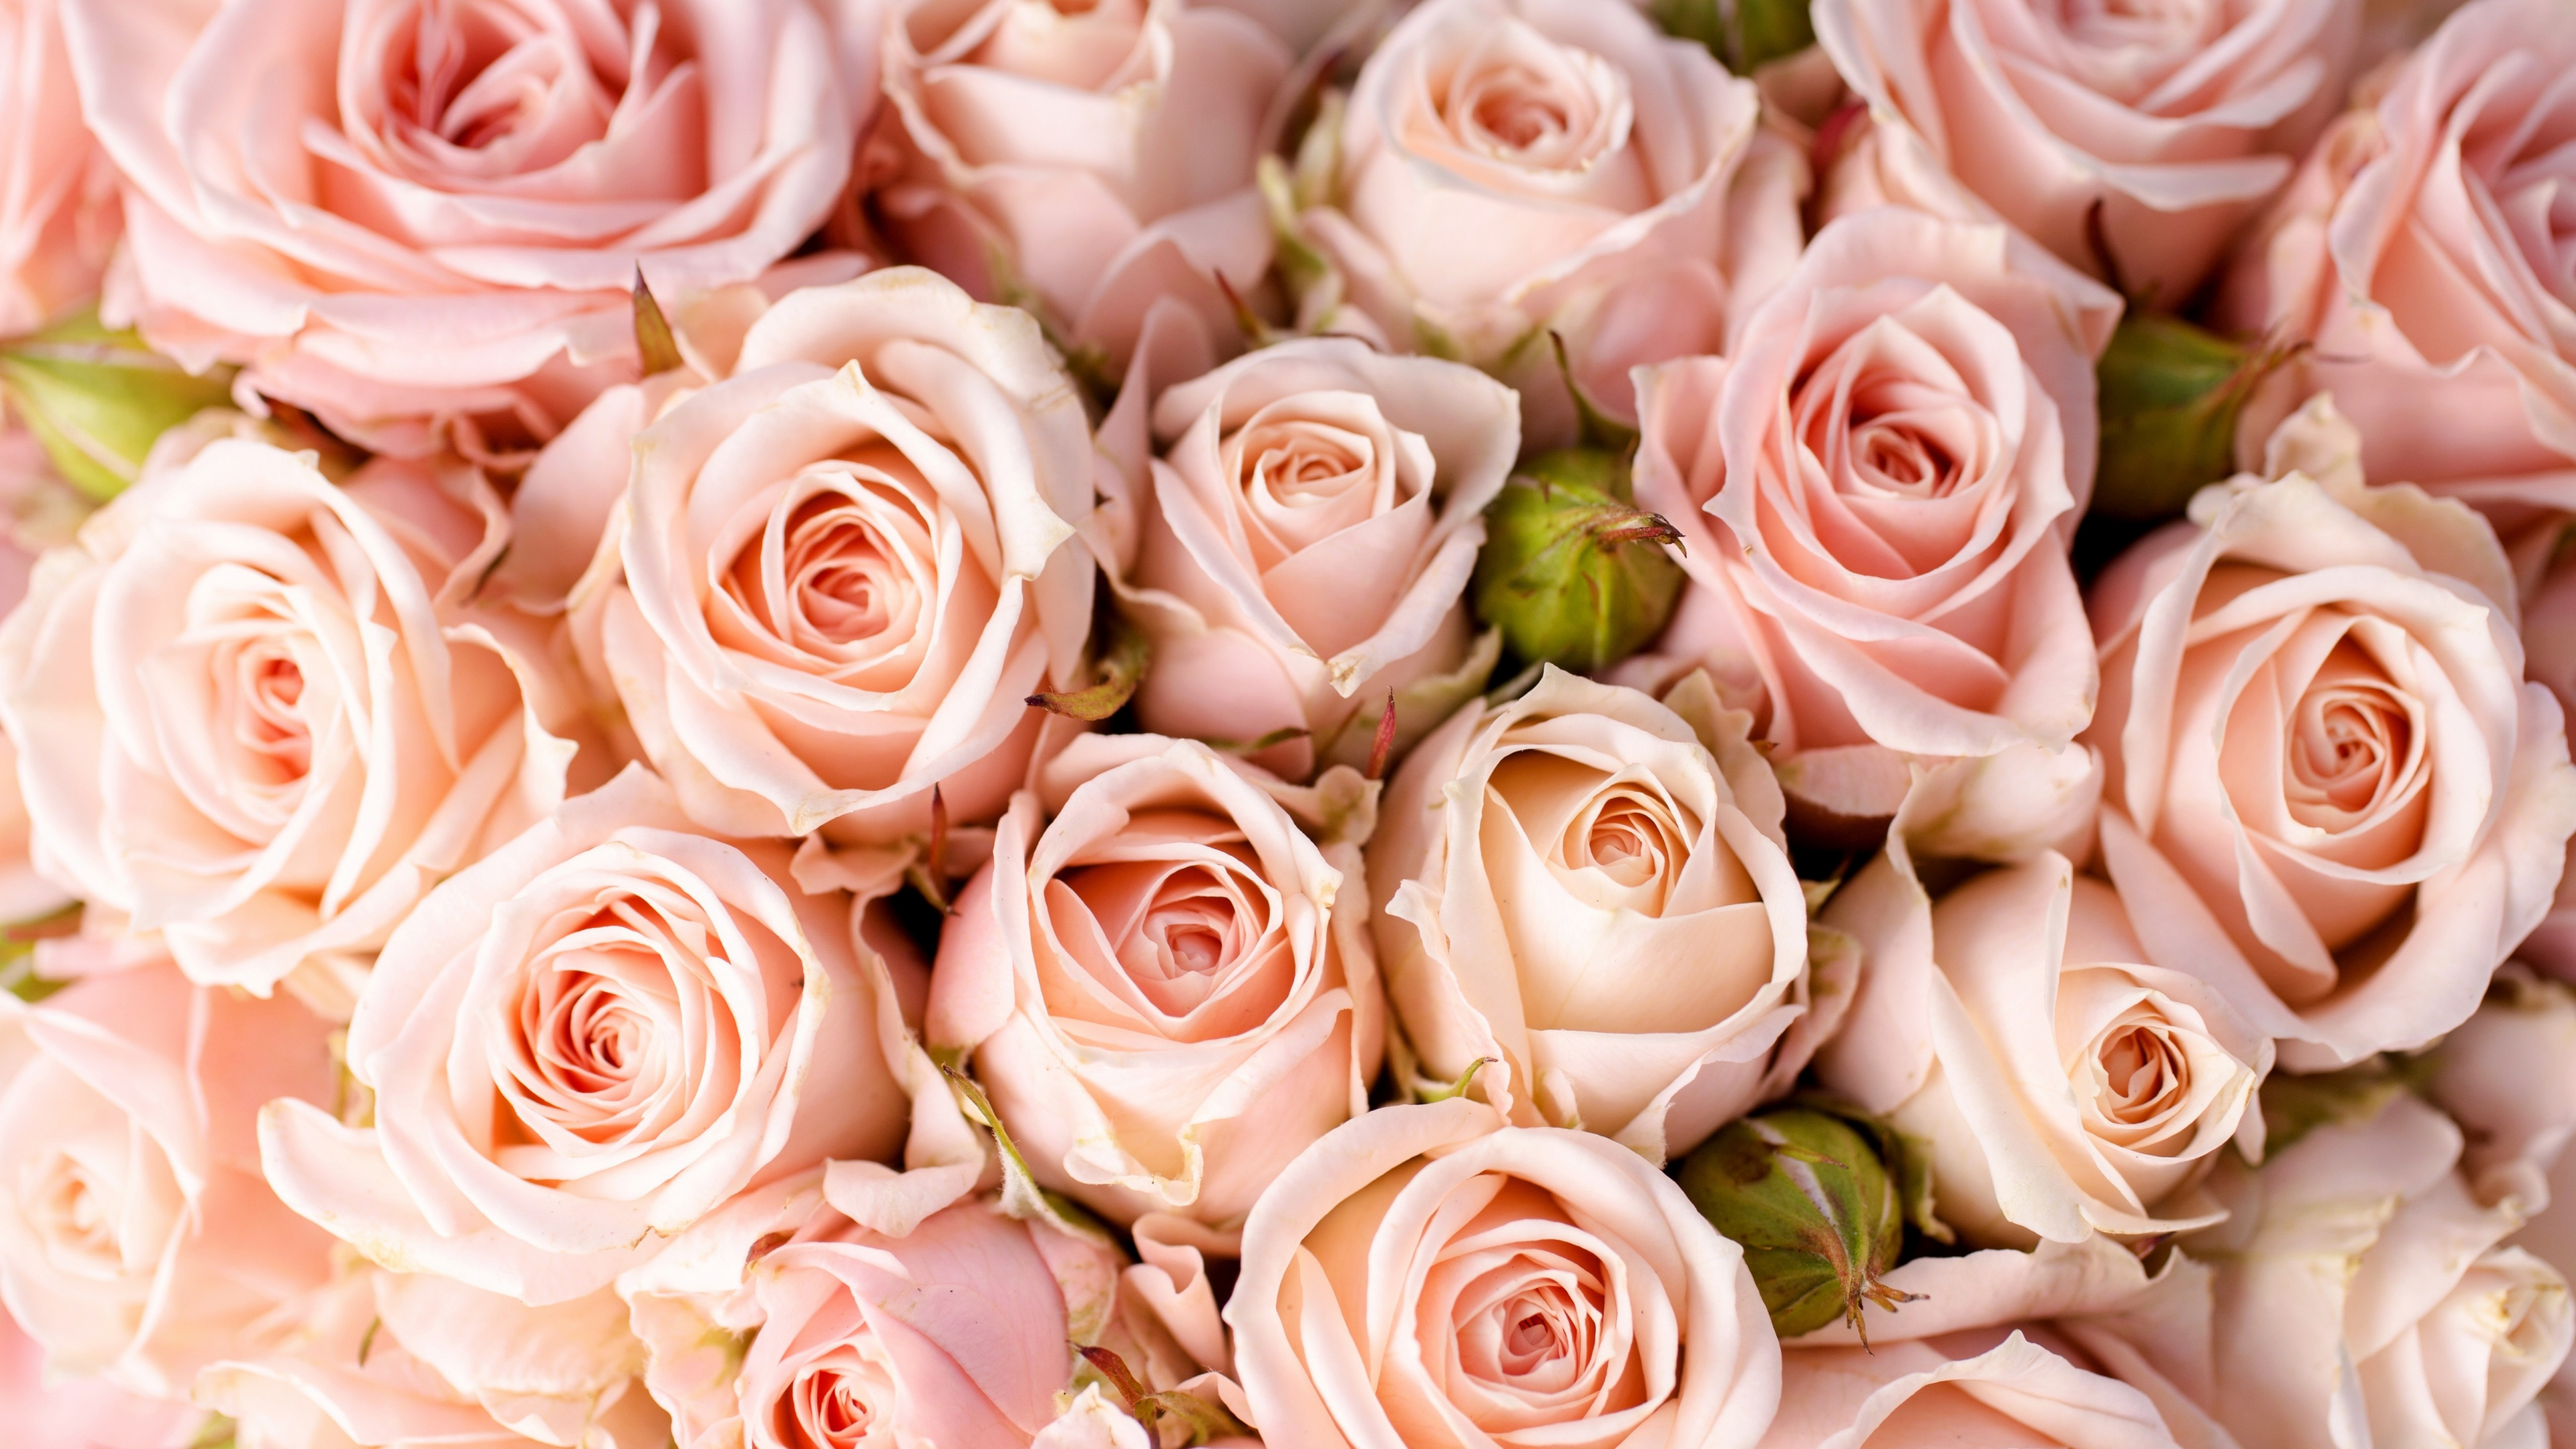 Pink Roses in Close up Photography. Wallpaper in 3840x2160 Resolution